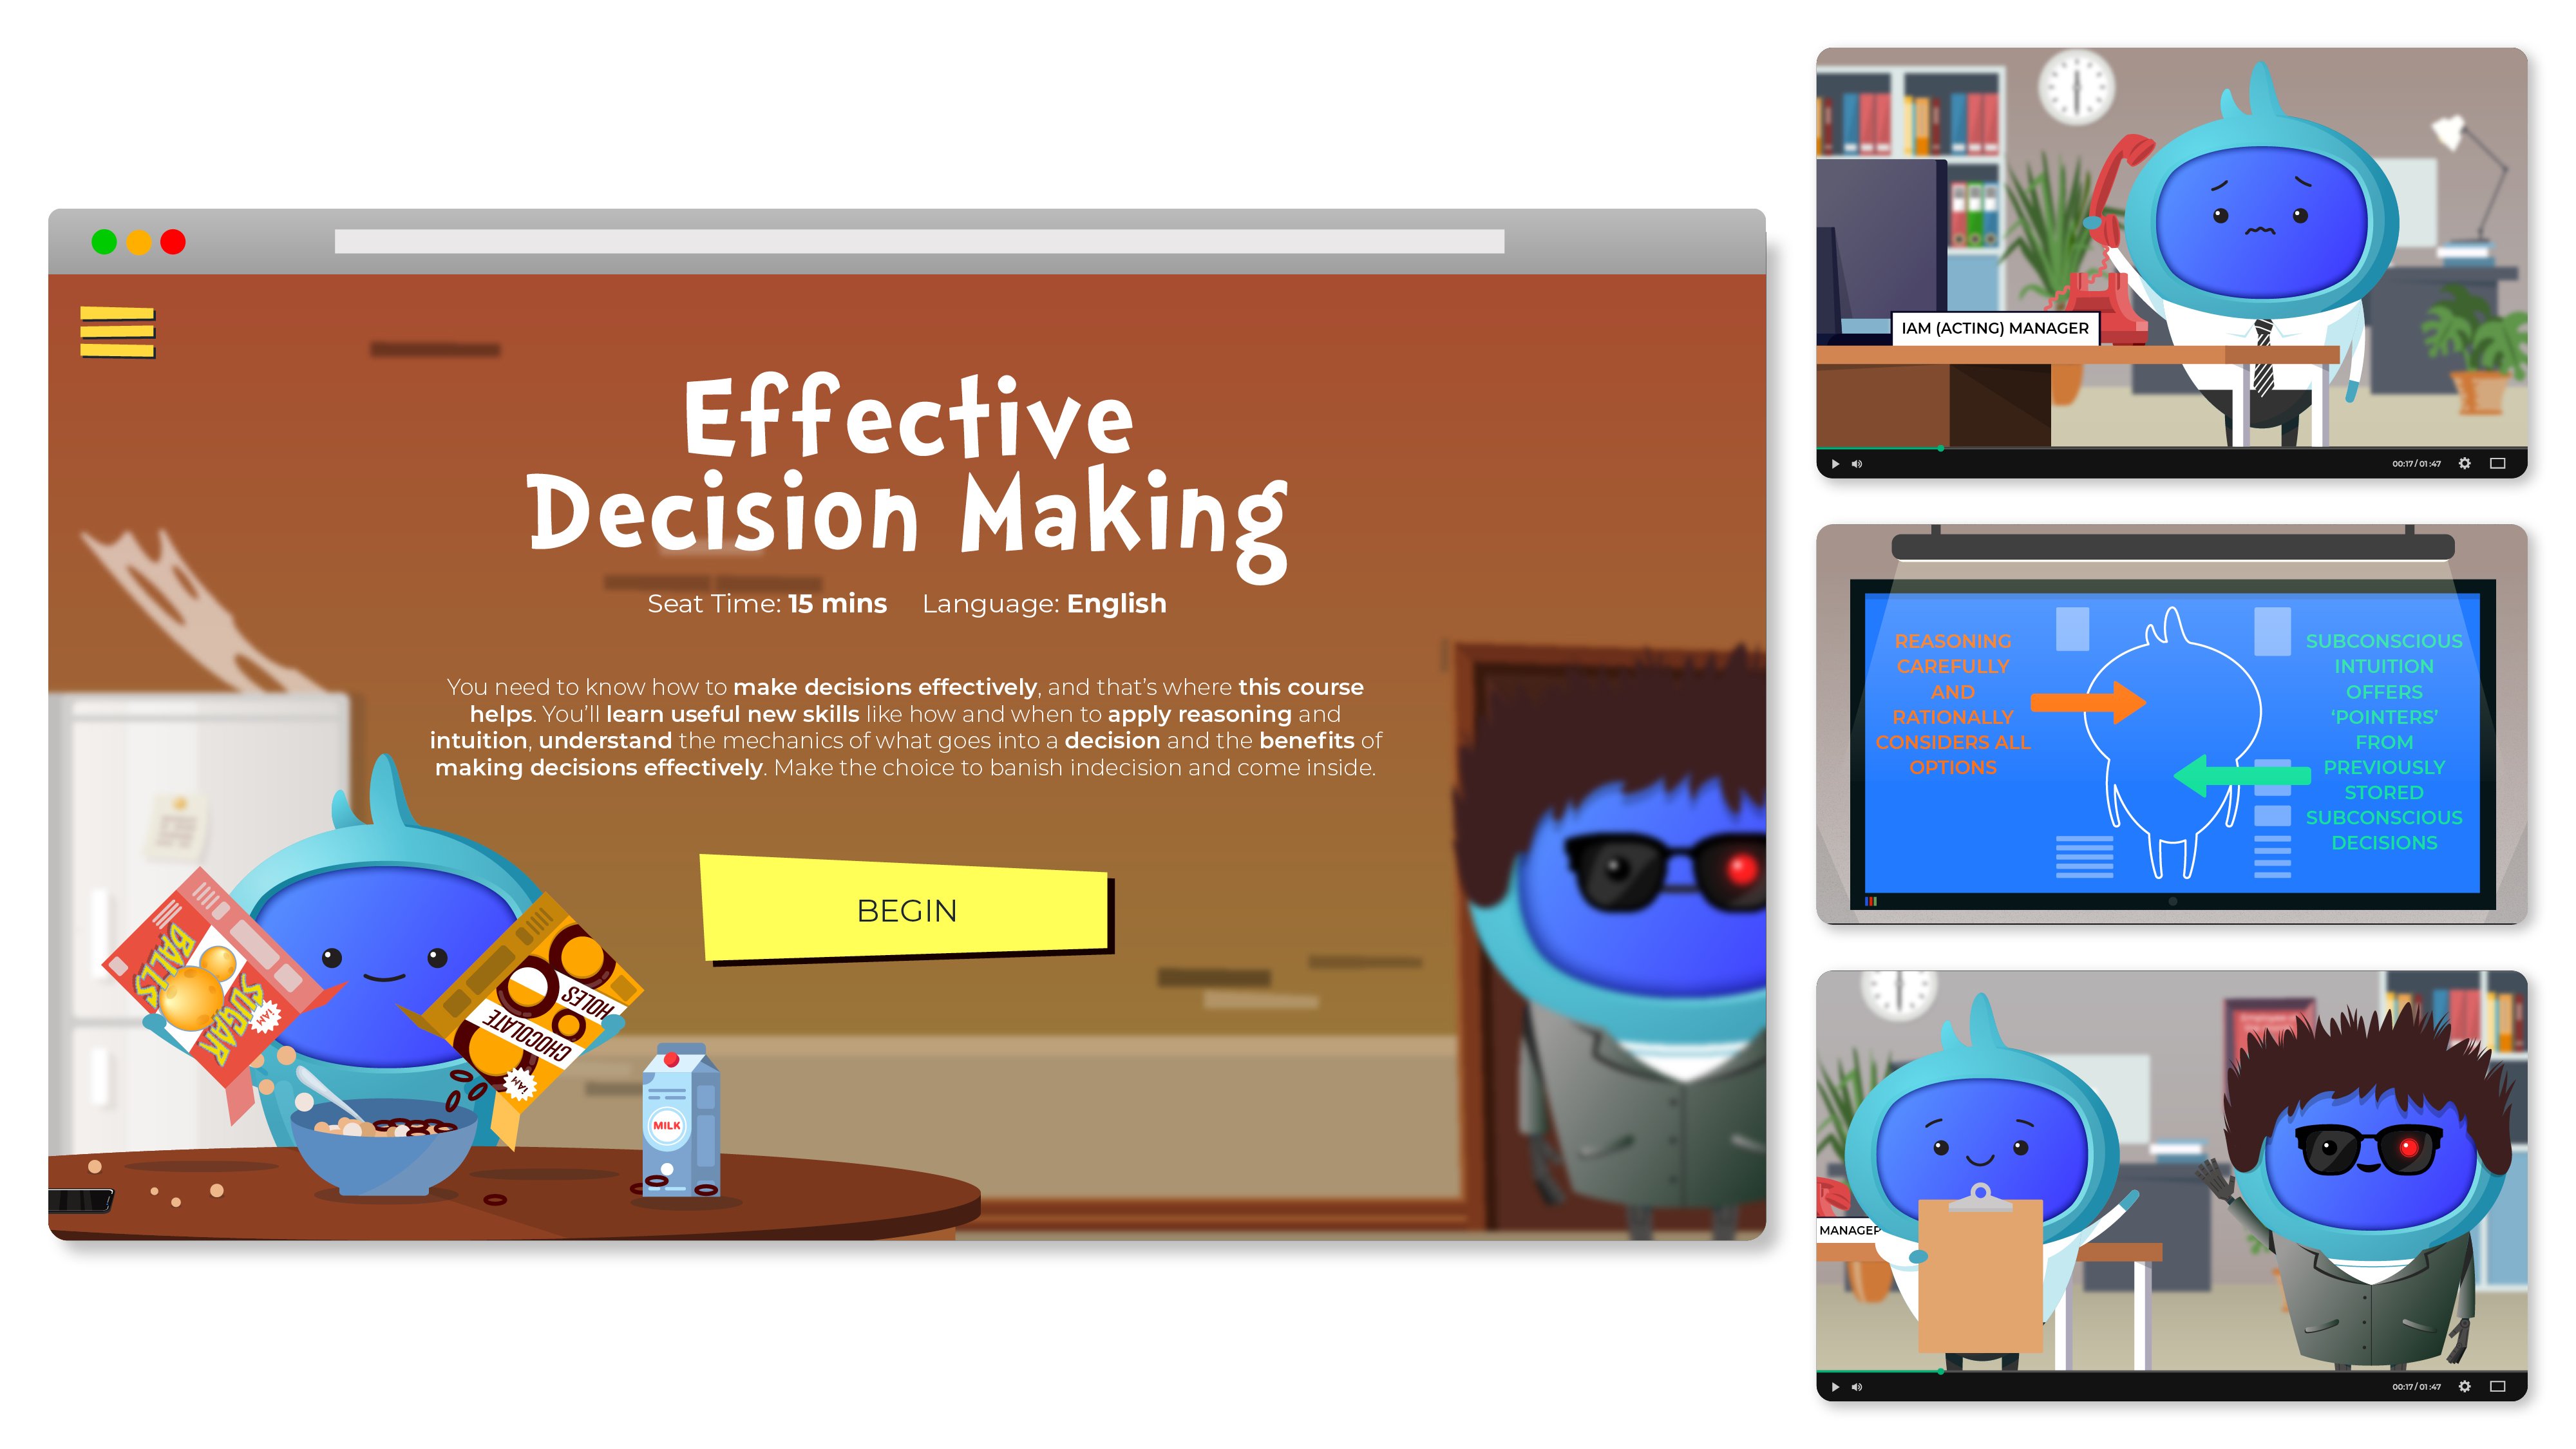 Effective Decision Making - Relaxation - Landing pages image Solo images